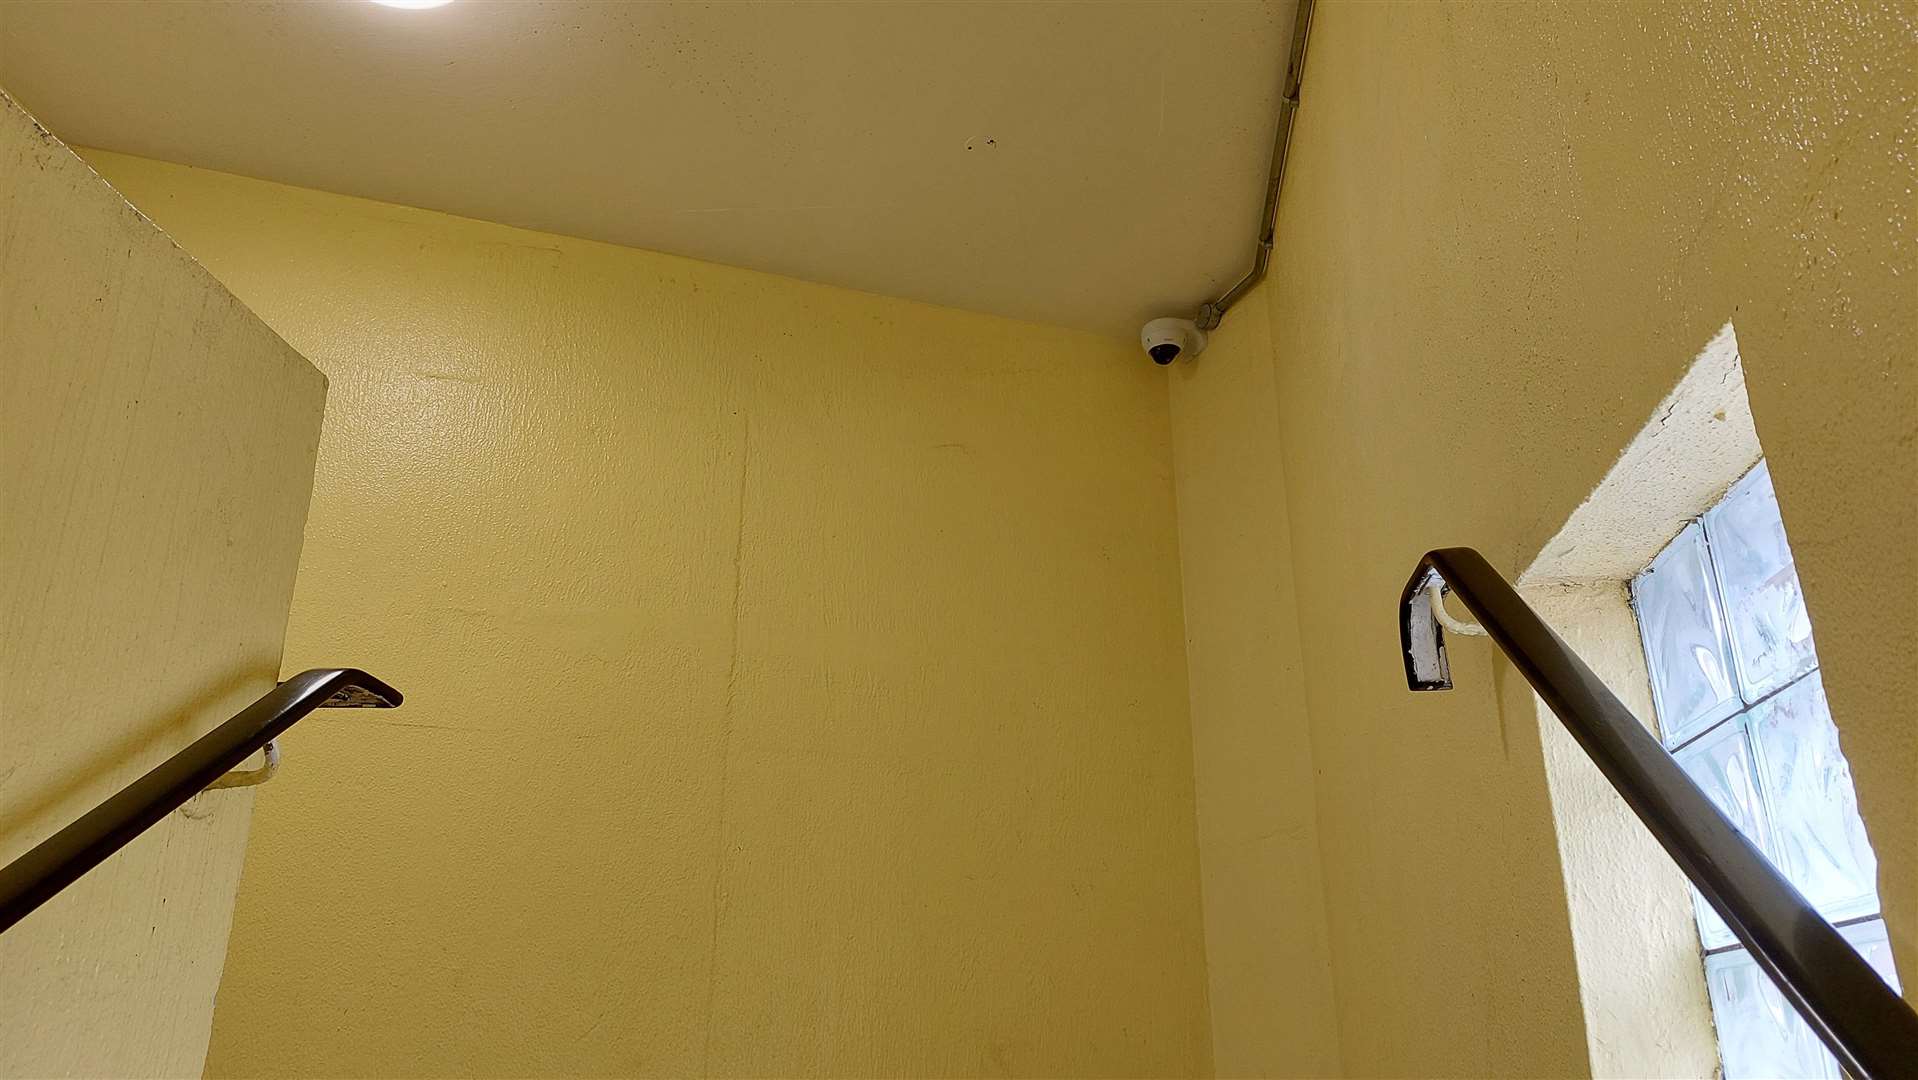 A CCTV camera has been installed in the stairwell of the Edinburgh Road car park